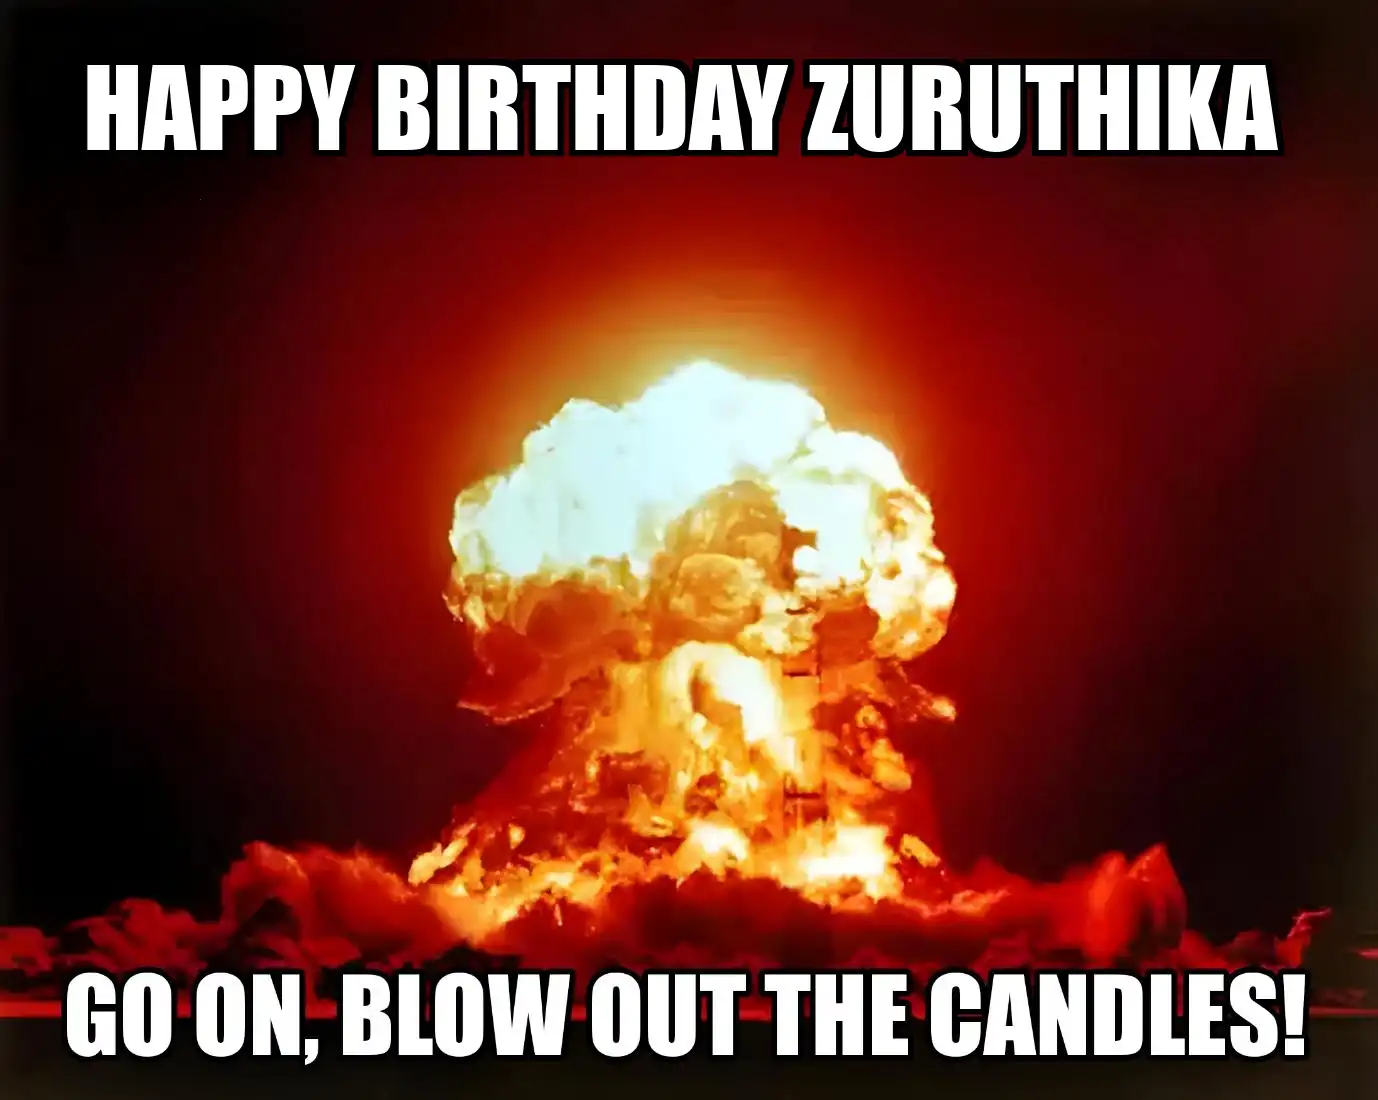 Happy Birthday Zuruthika Go On Blow Out The Candles Meme